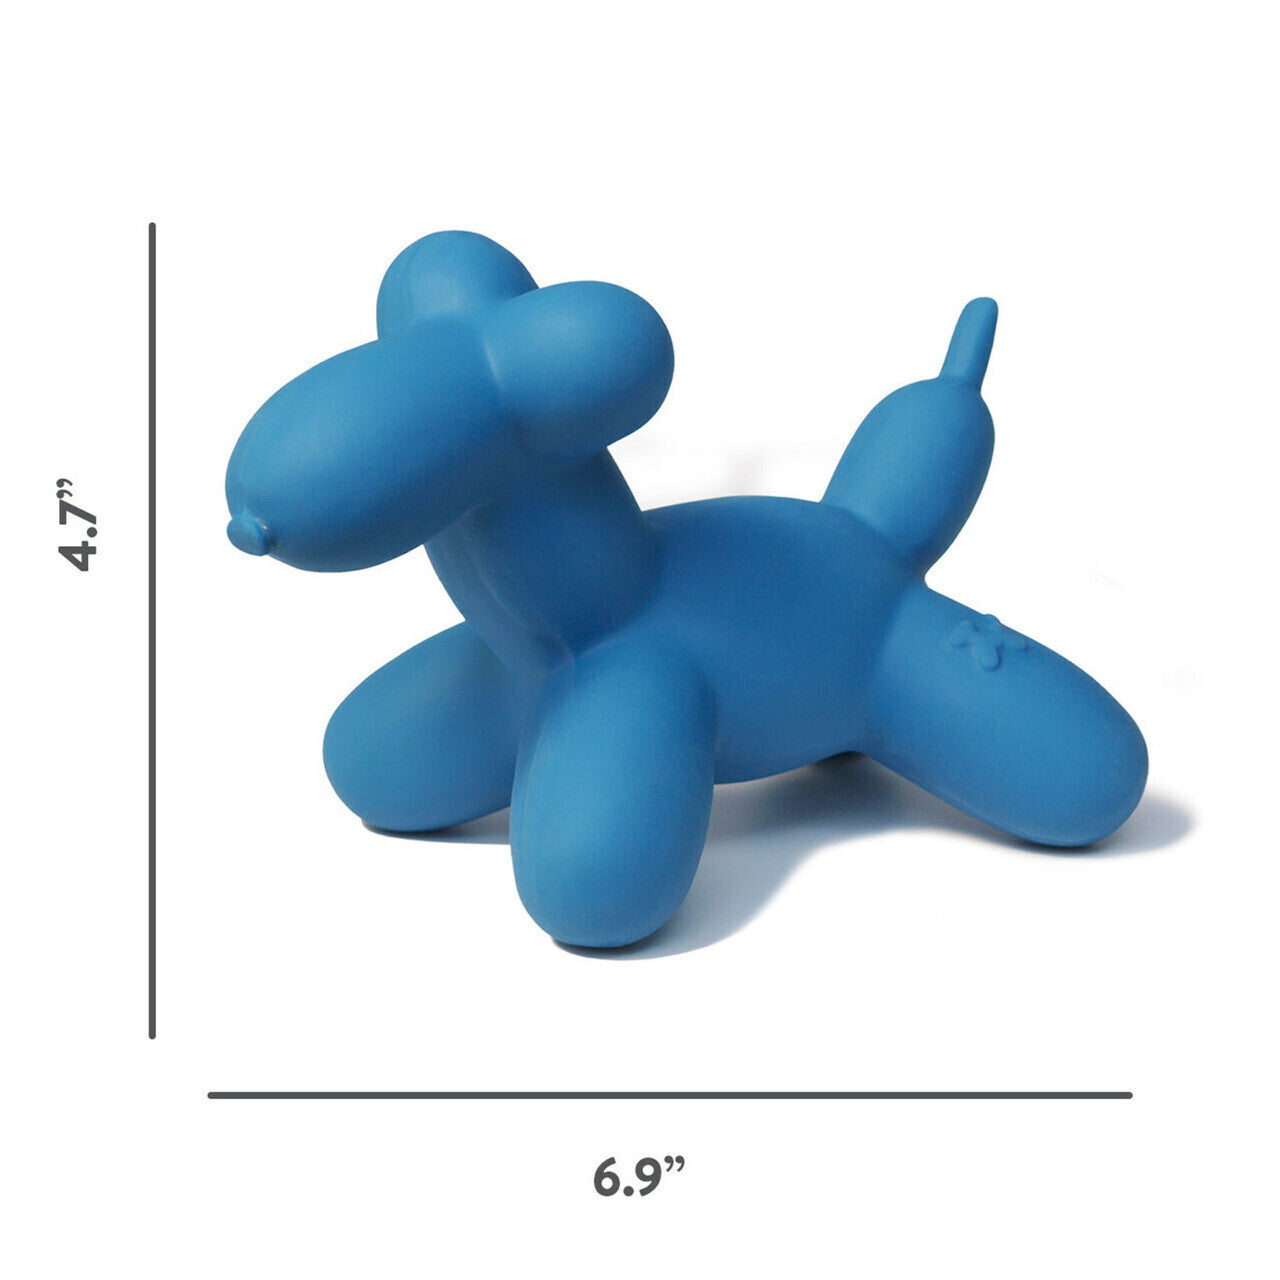 Charming Pet Latex Squeaker Dog Toy - Blue Balloon Dog - Large - Pets and More